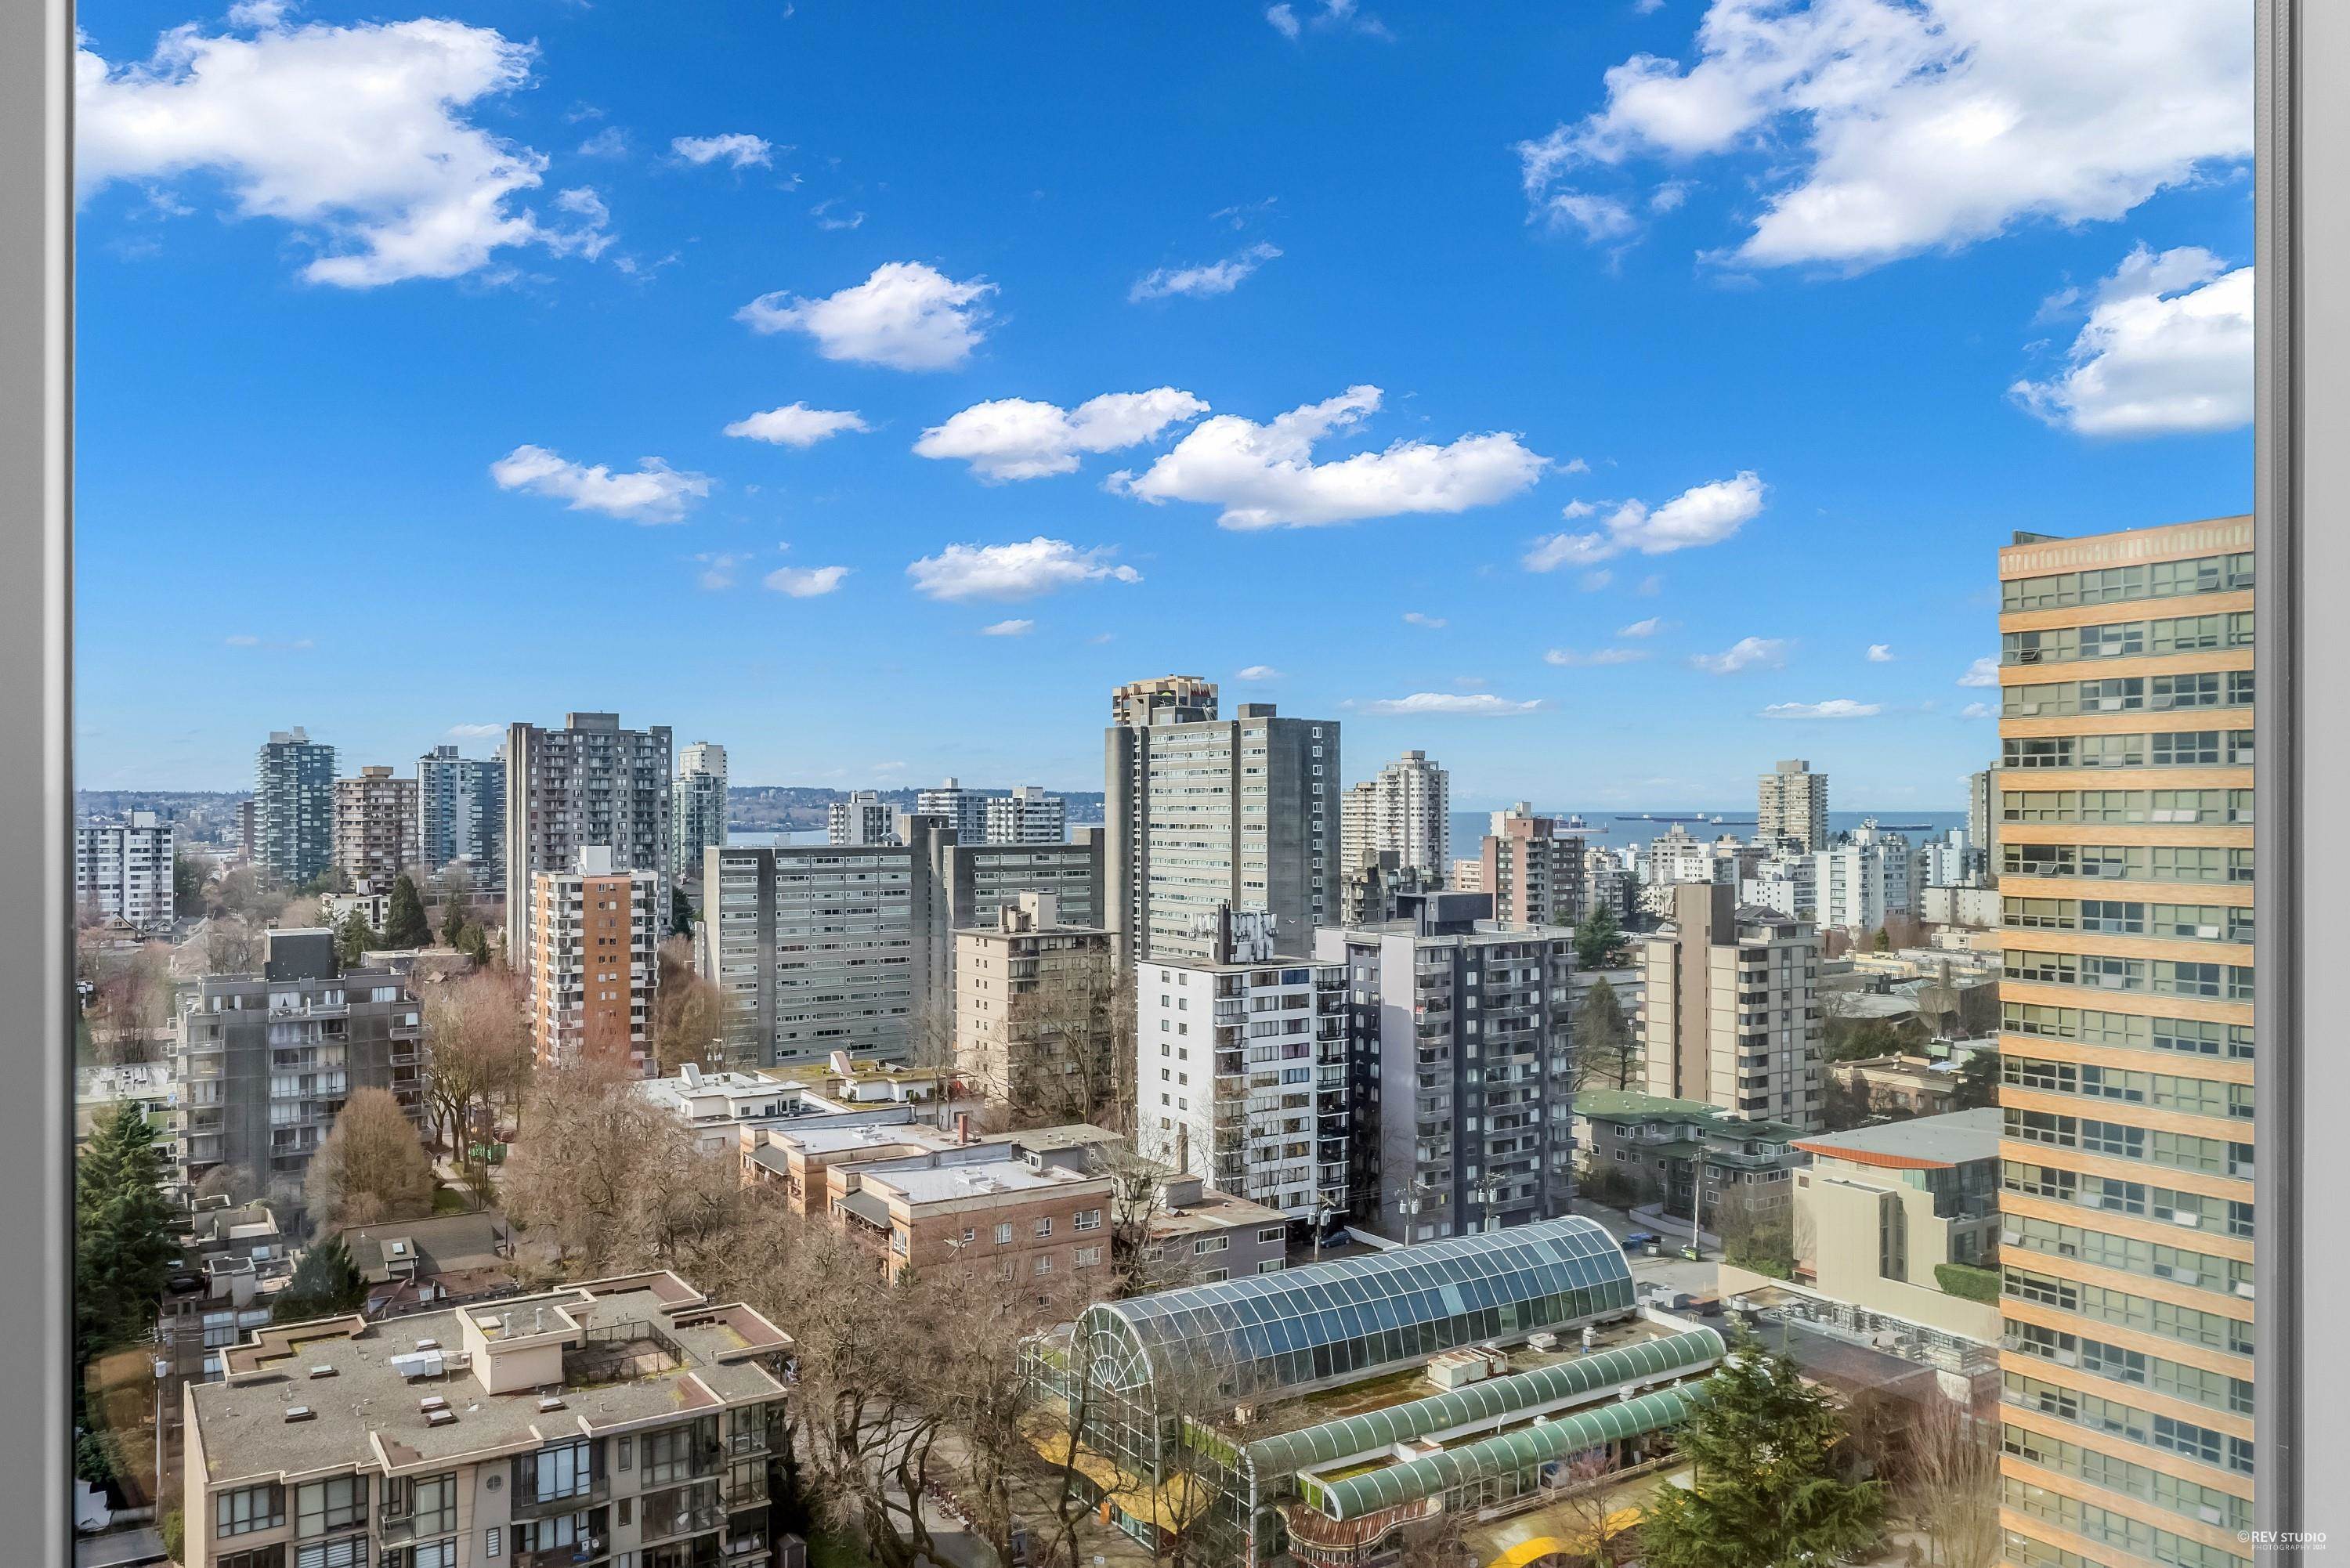 1704-1568 ALBERNI STREET, Vancouver, British Columbia, 2 Bedrooms Bedrooms, ,2 BathroomsBathrooms,Residential Attached,For Sale,R2870903